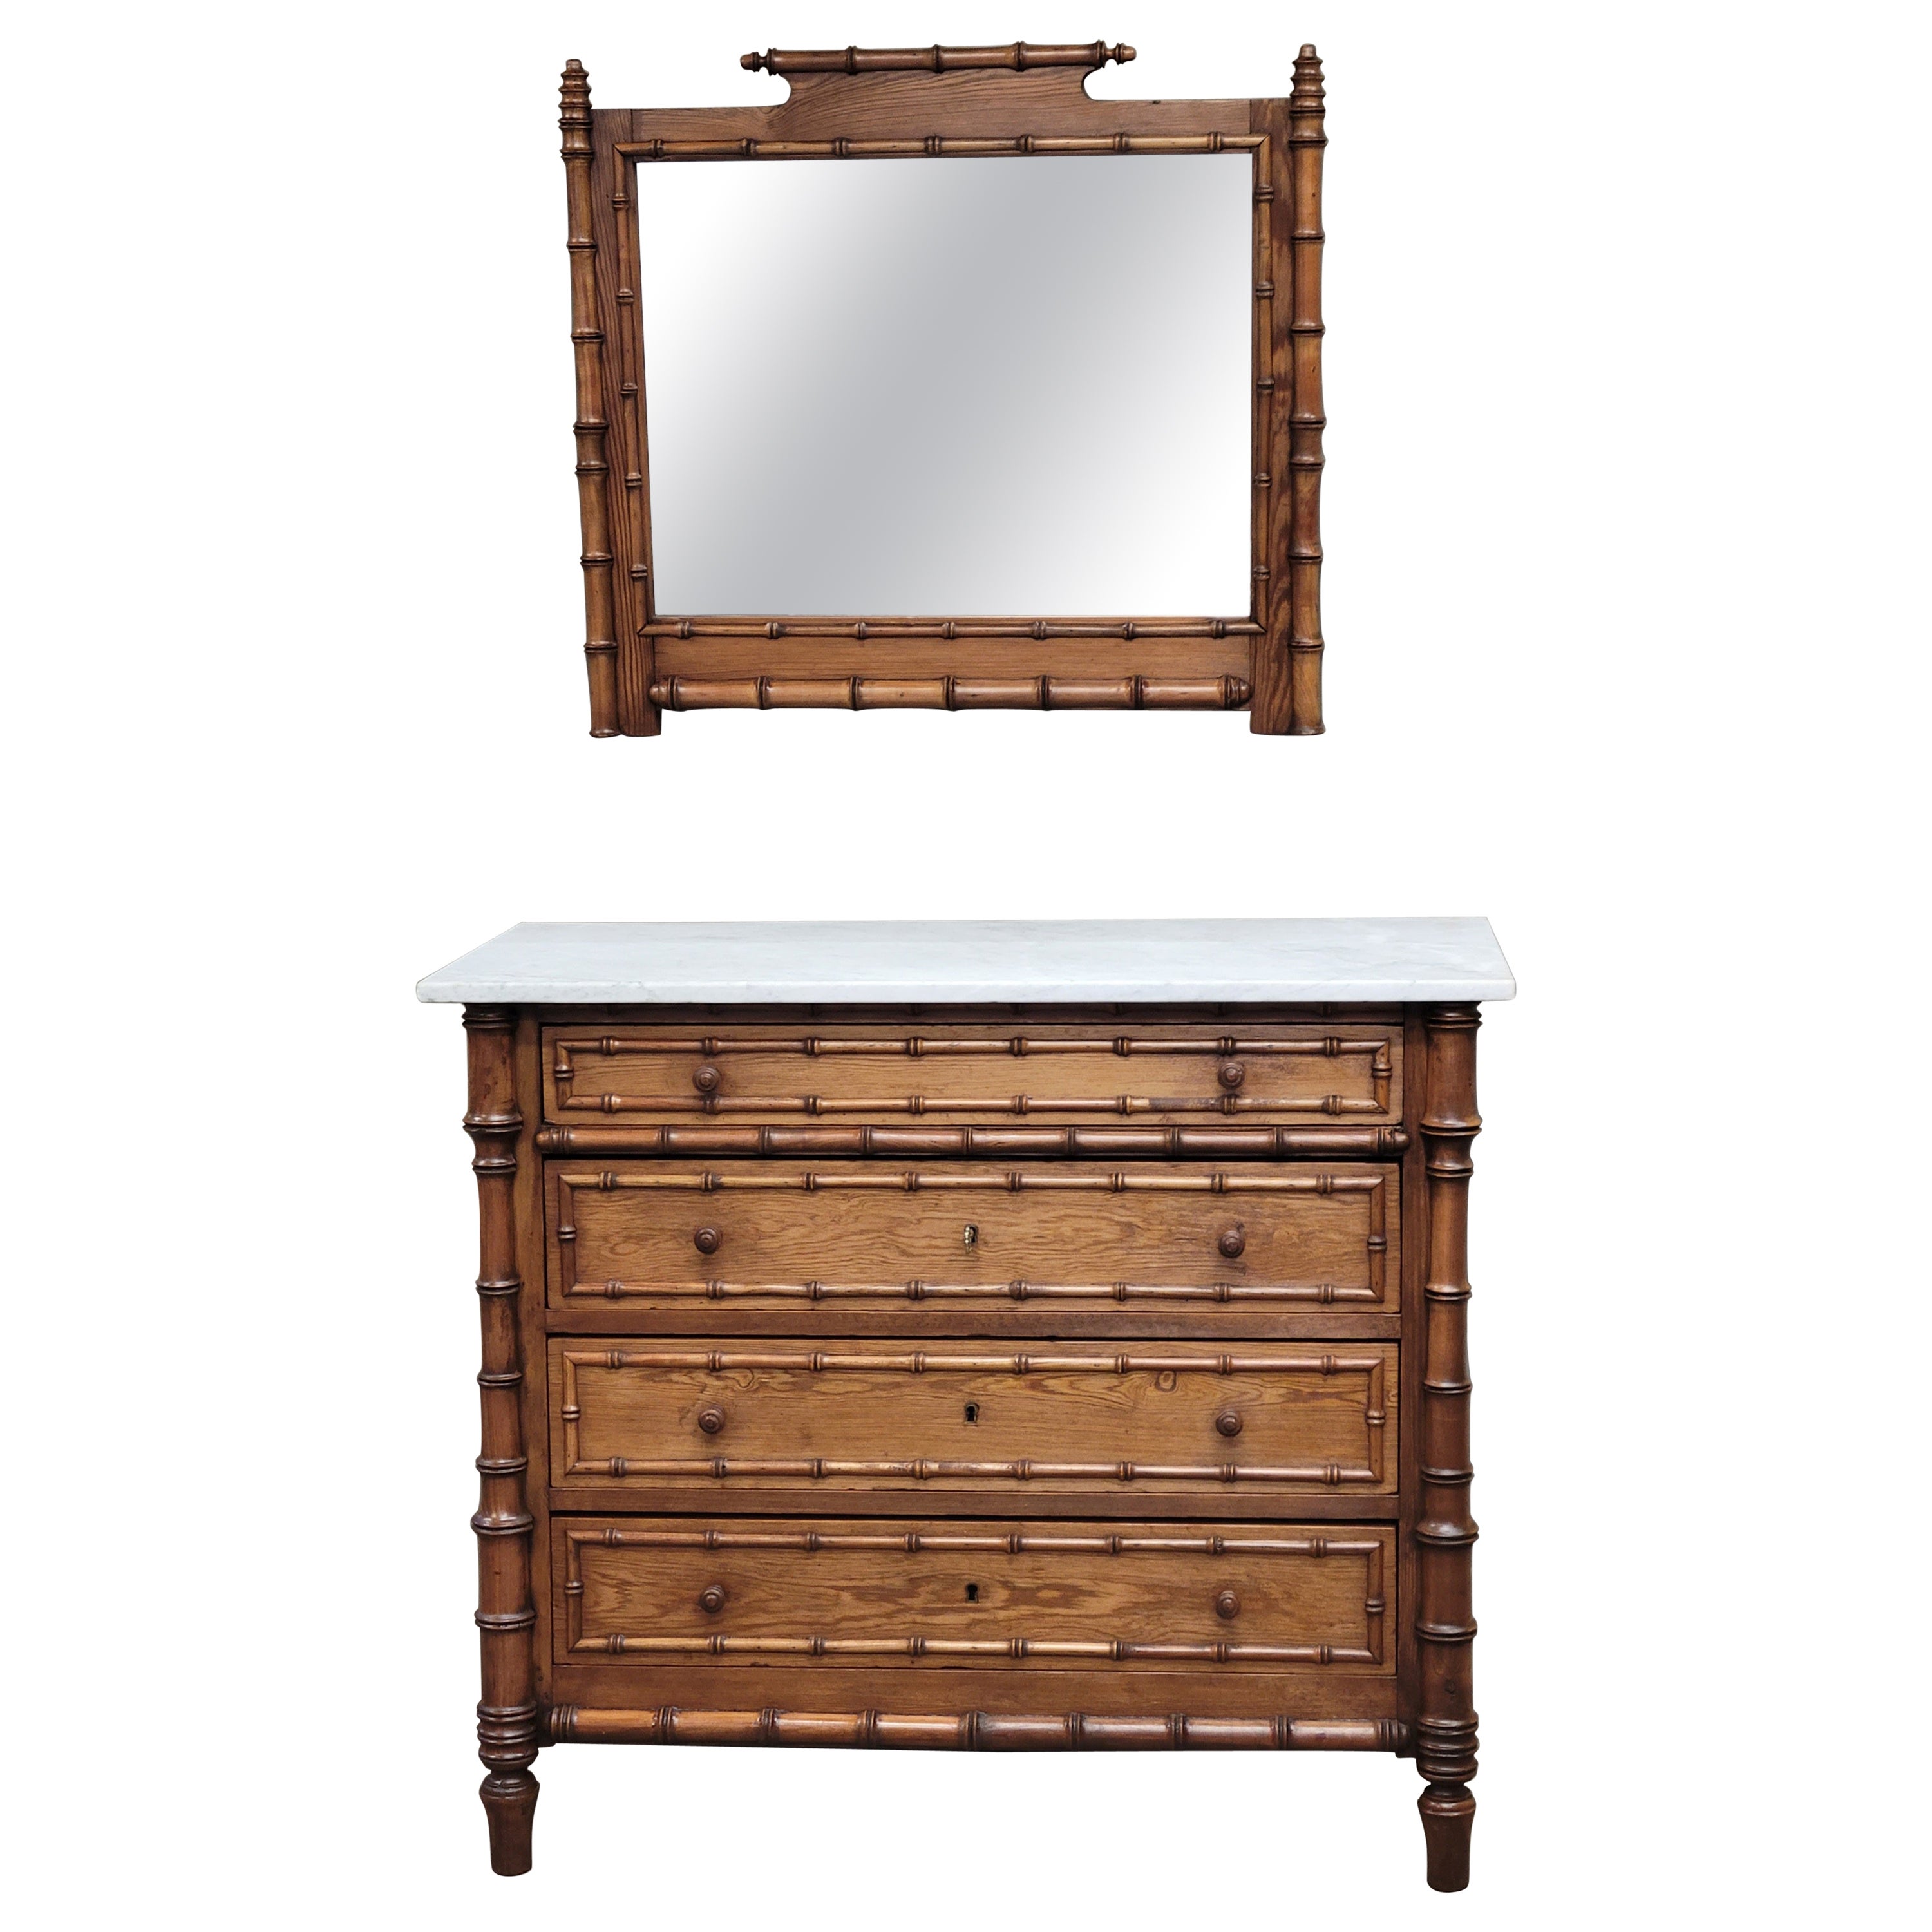 Antique French Faux Bamboo Dresser With Carrera Marble Top and Matching Mirror